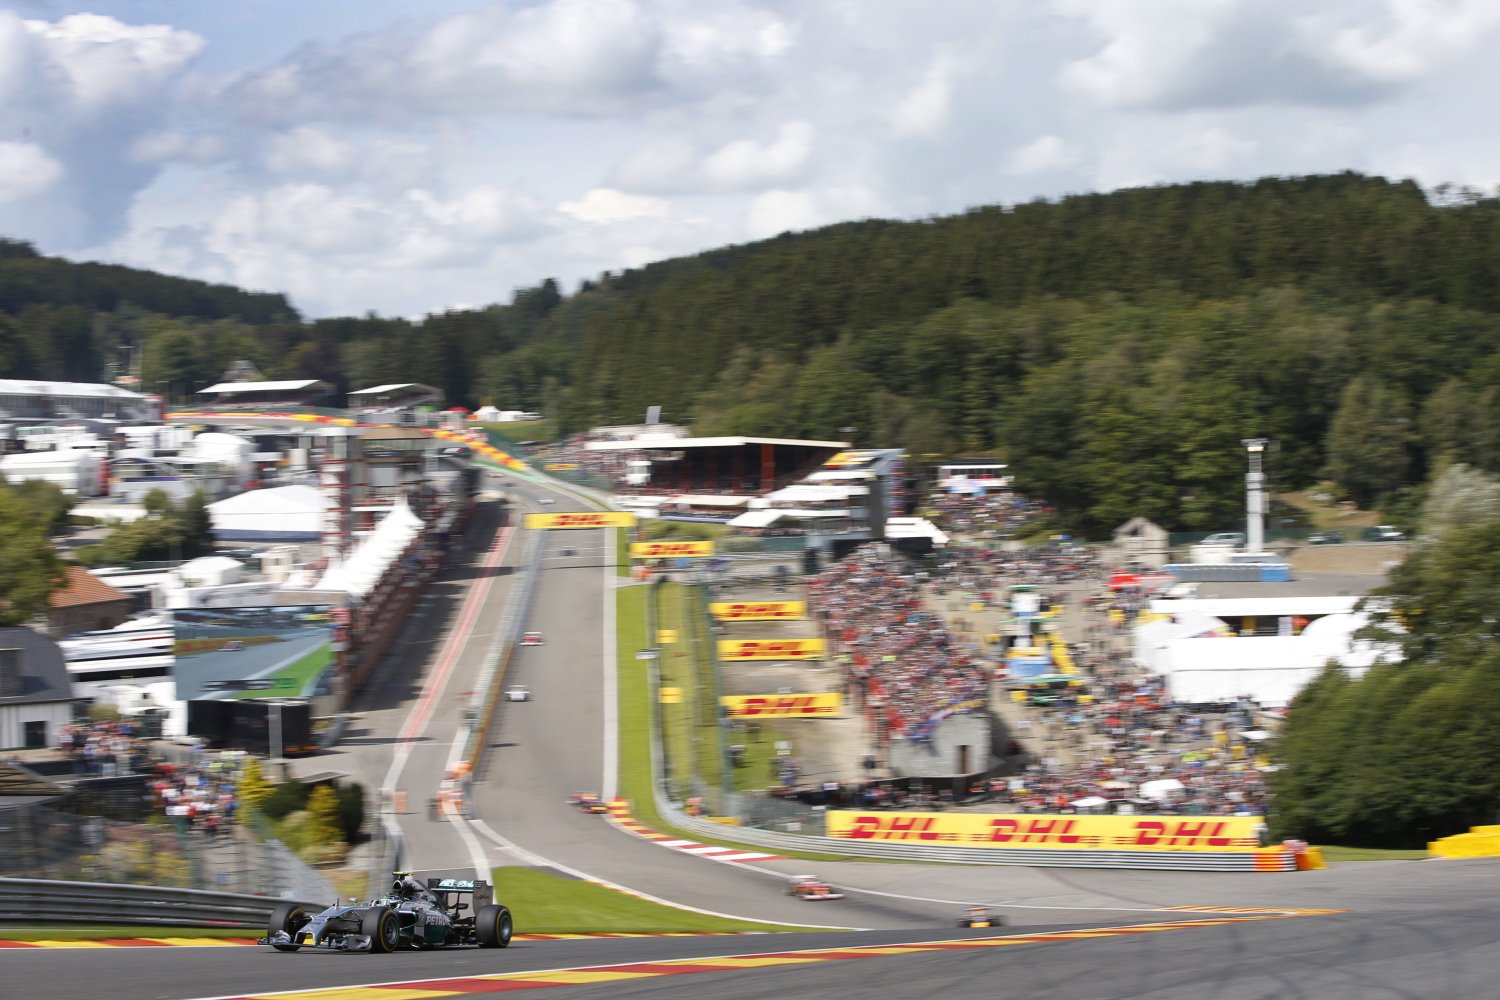 Spa expects big crowd